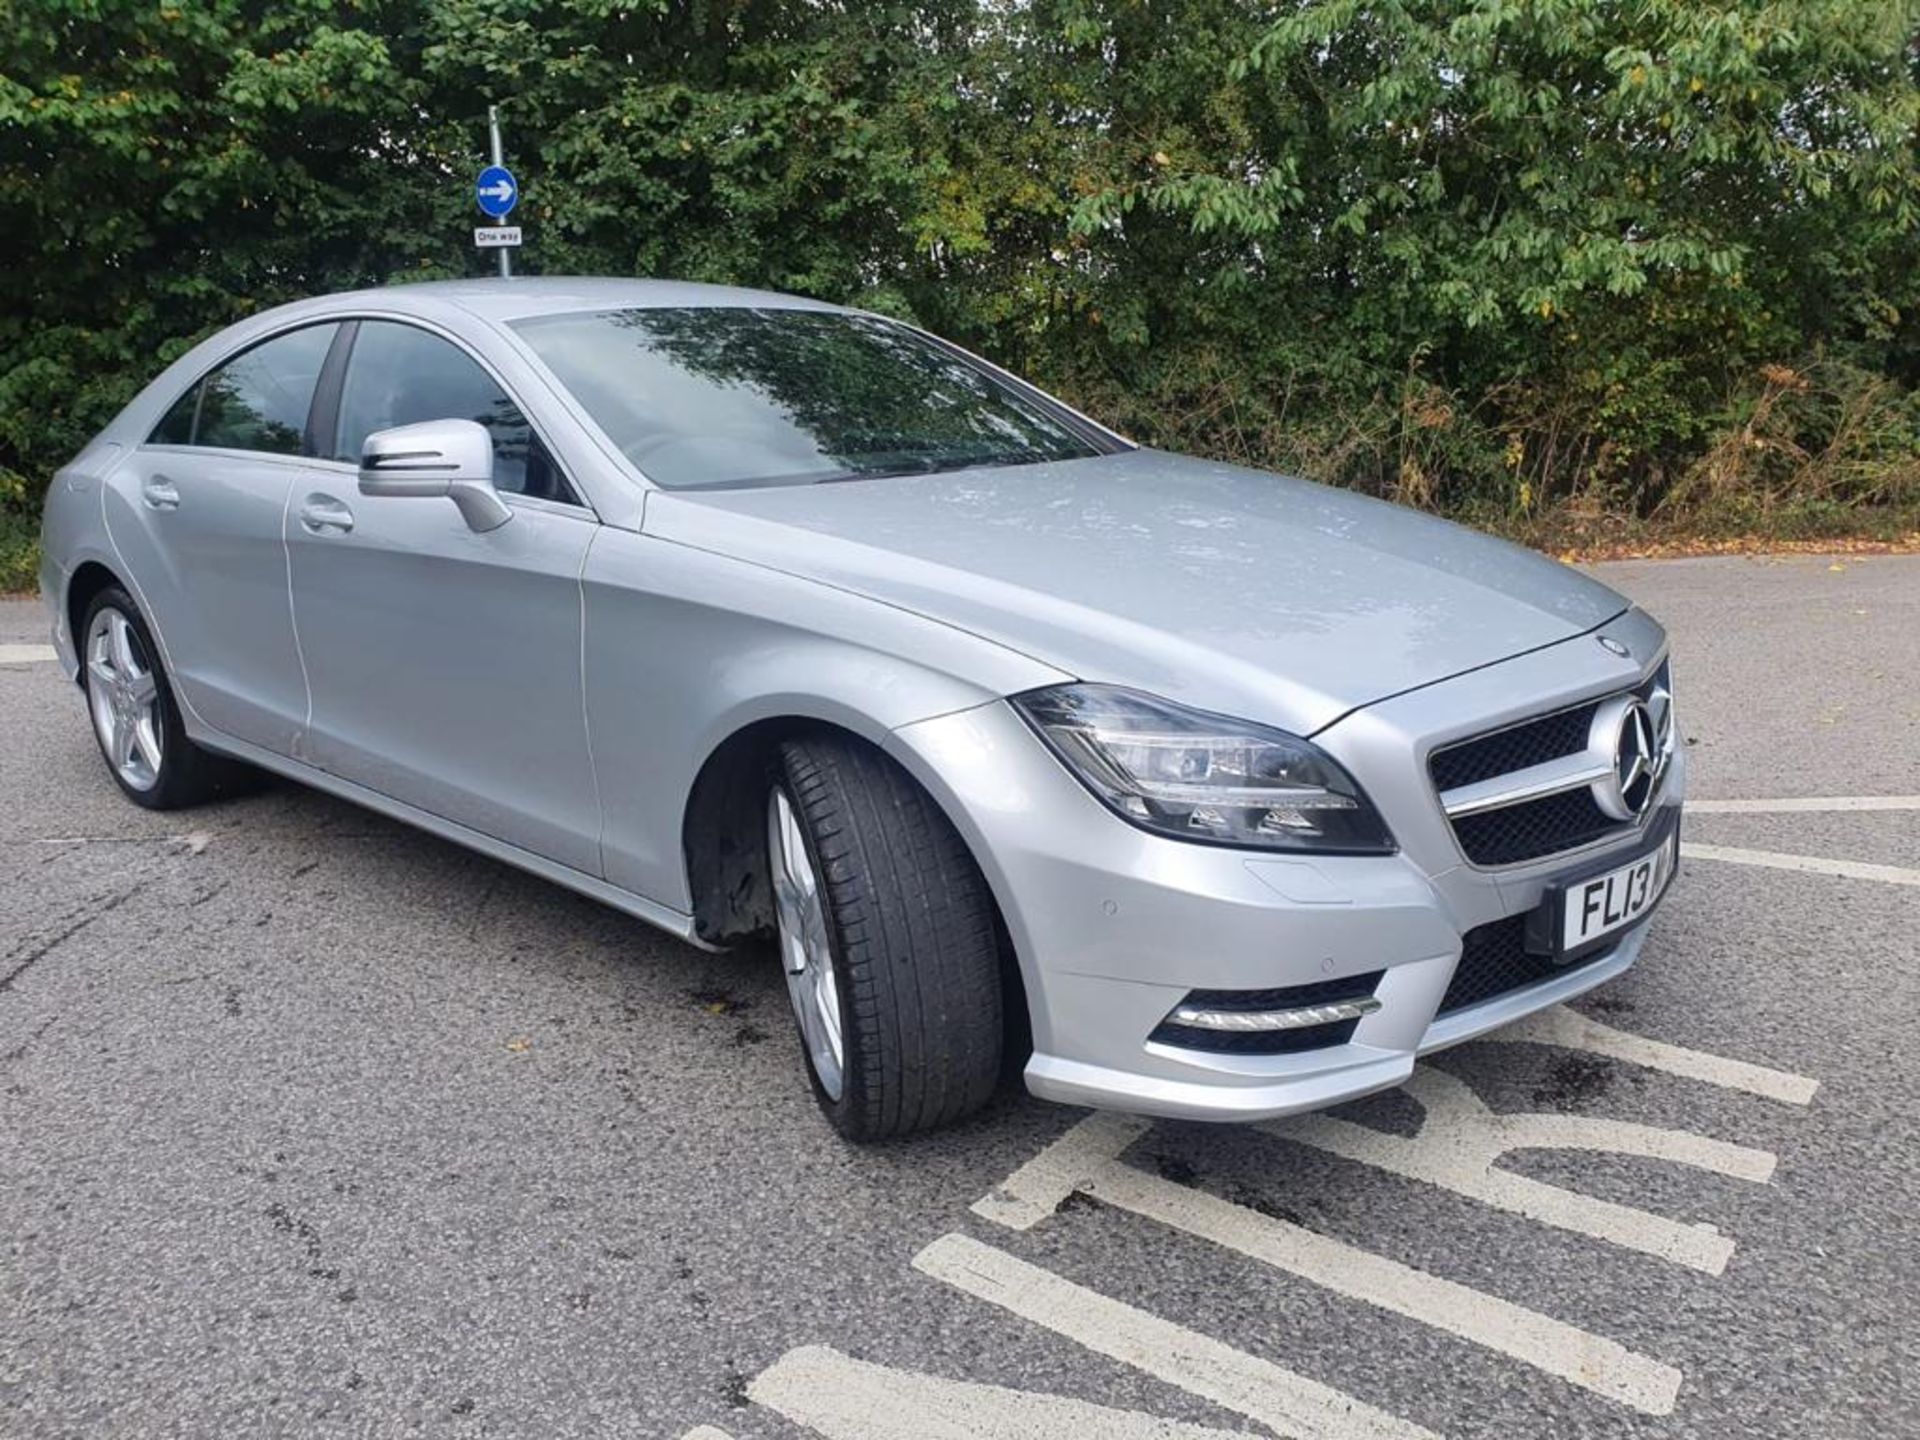 2013 MERCEDES-BENZ CLS250 CDI AMG BLUE-CY SPORT SILVER COUPE, 2.2 DIESEL, 45,952 MILES *NO VAT*